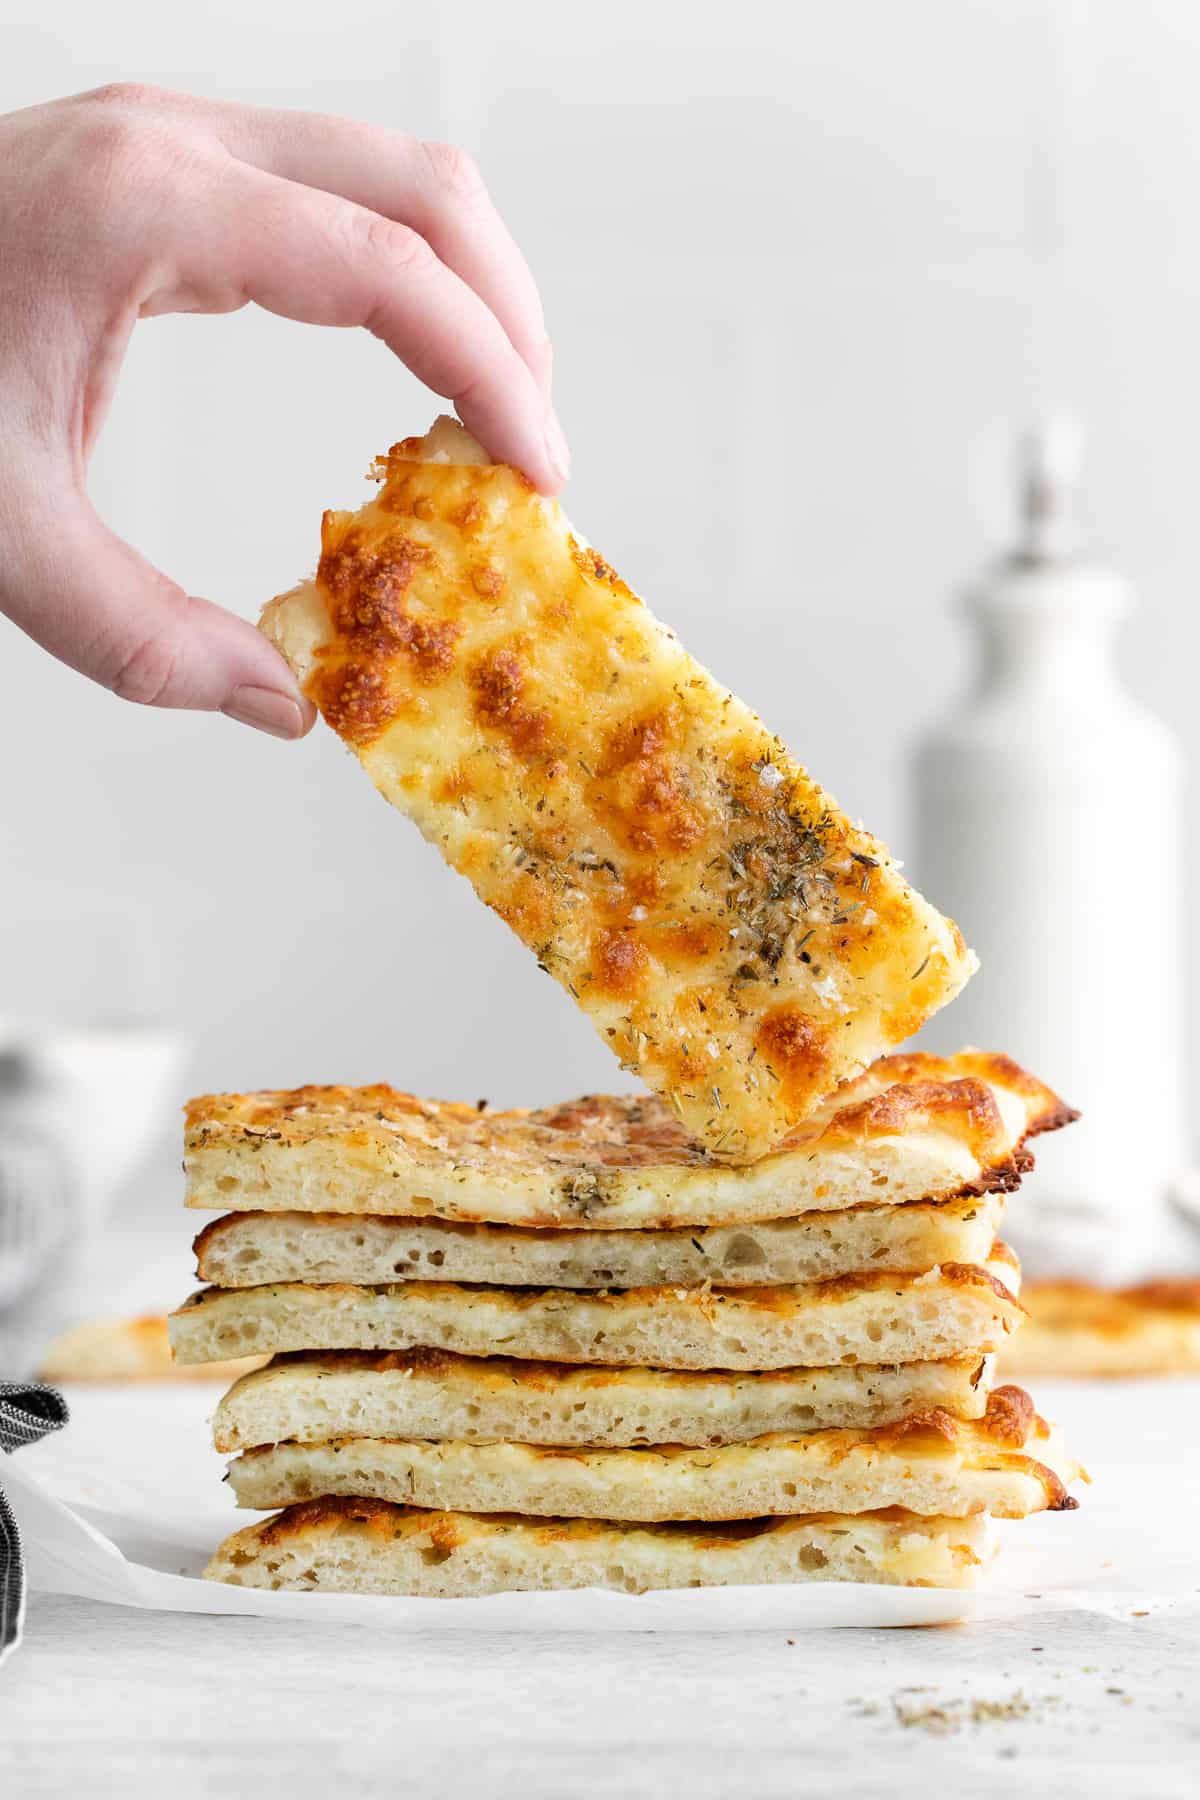 Cheese bread in a hand.